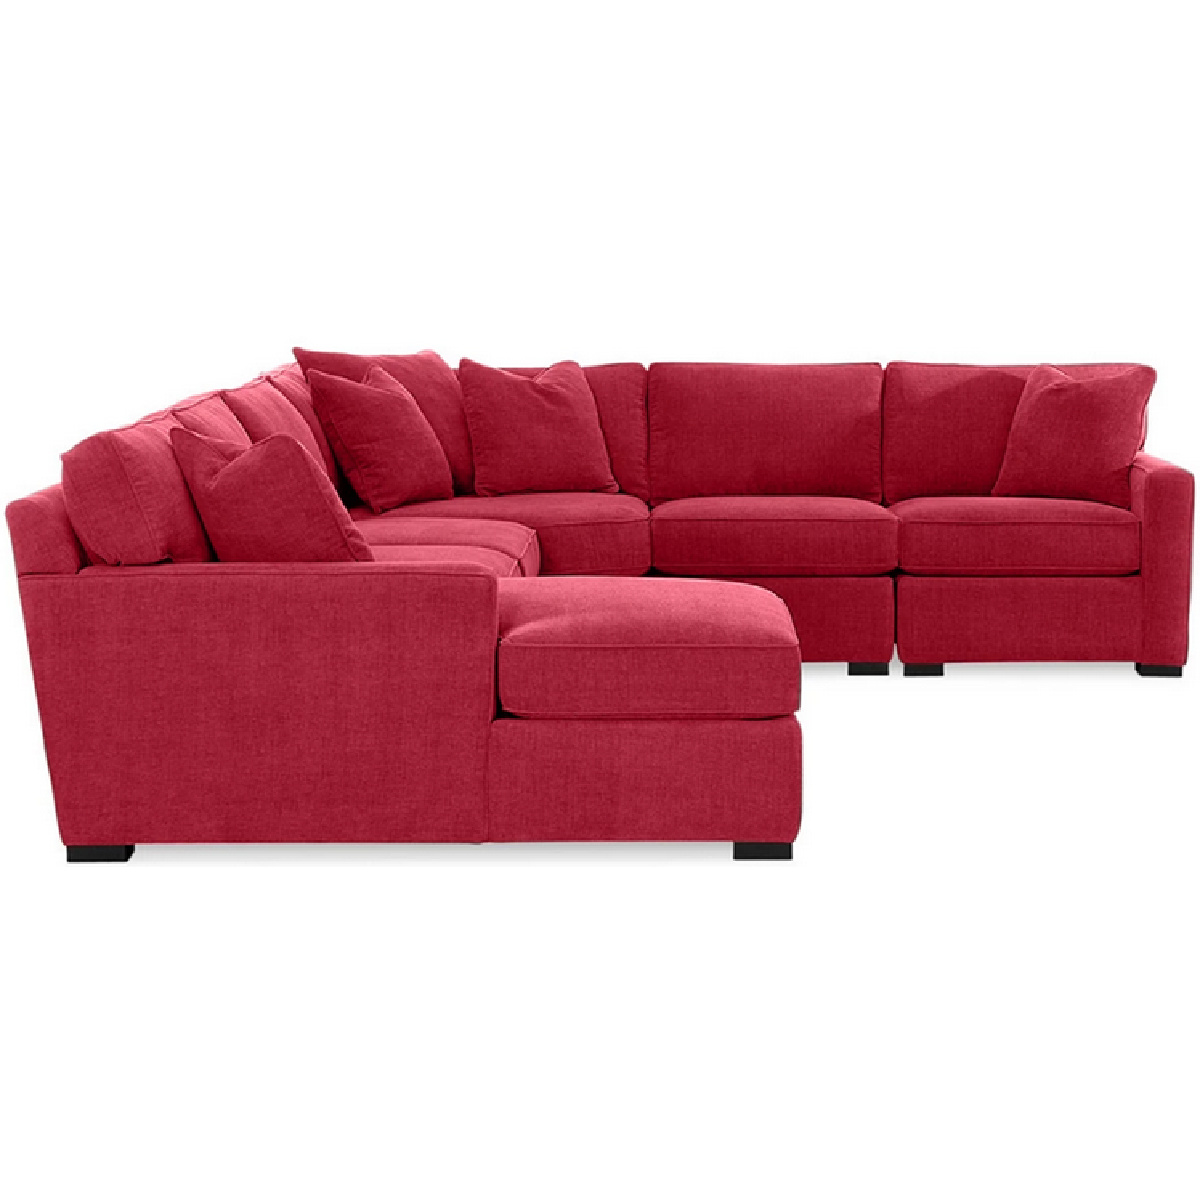 Radley 5-Piece Fabric Chaise Sectional Sofa